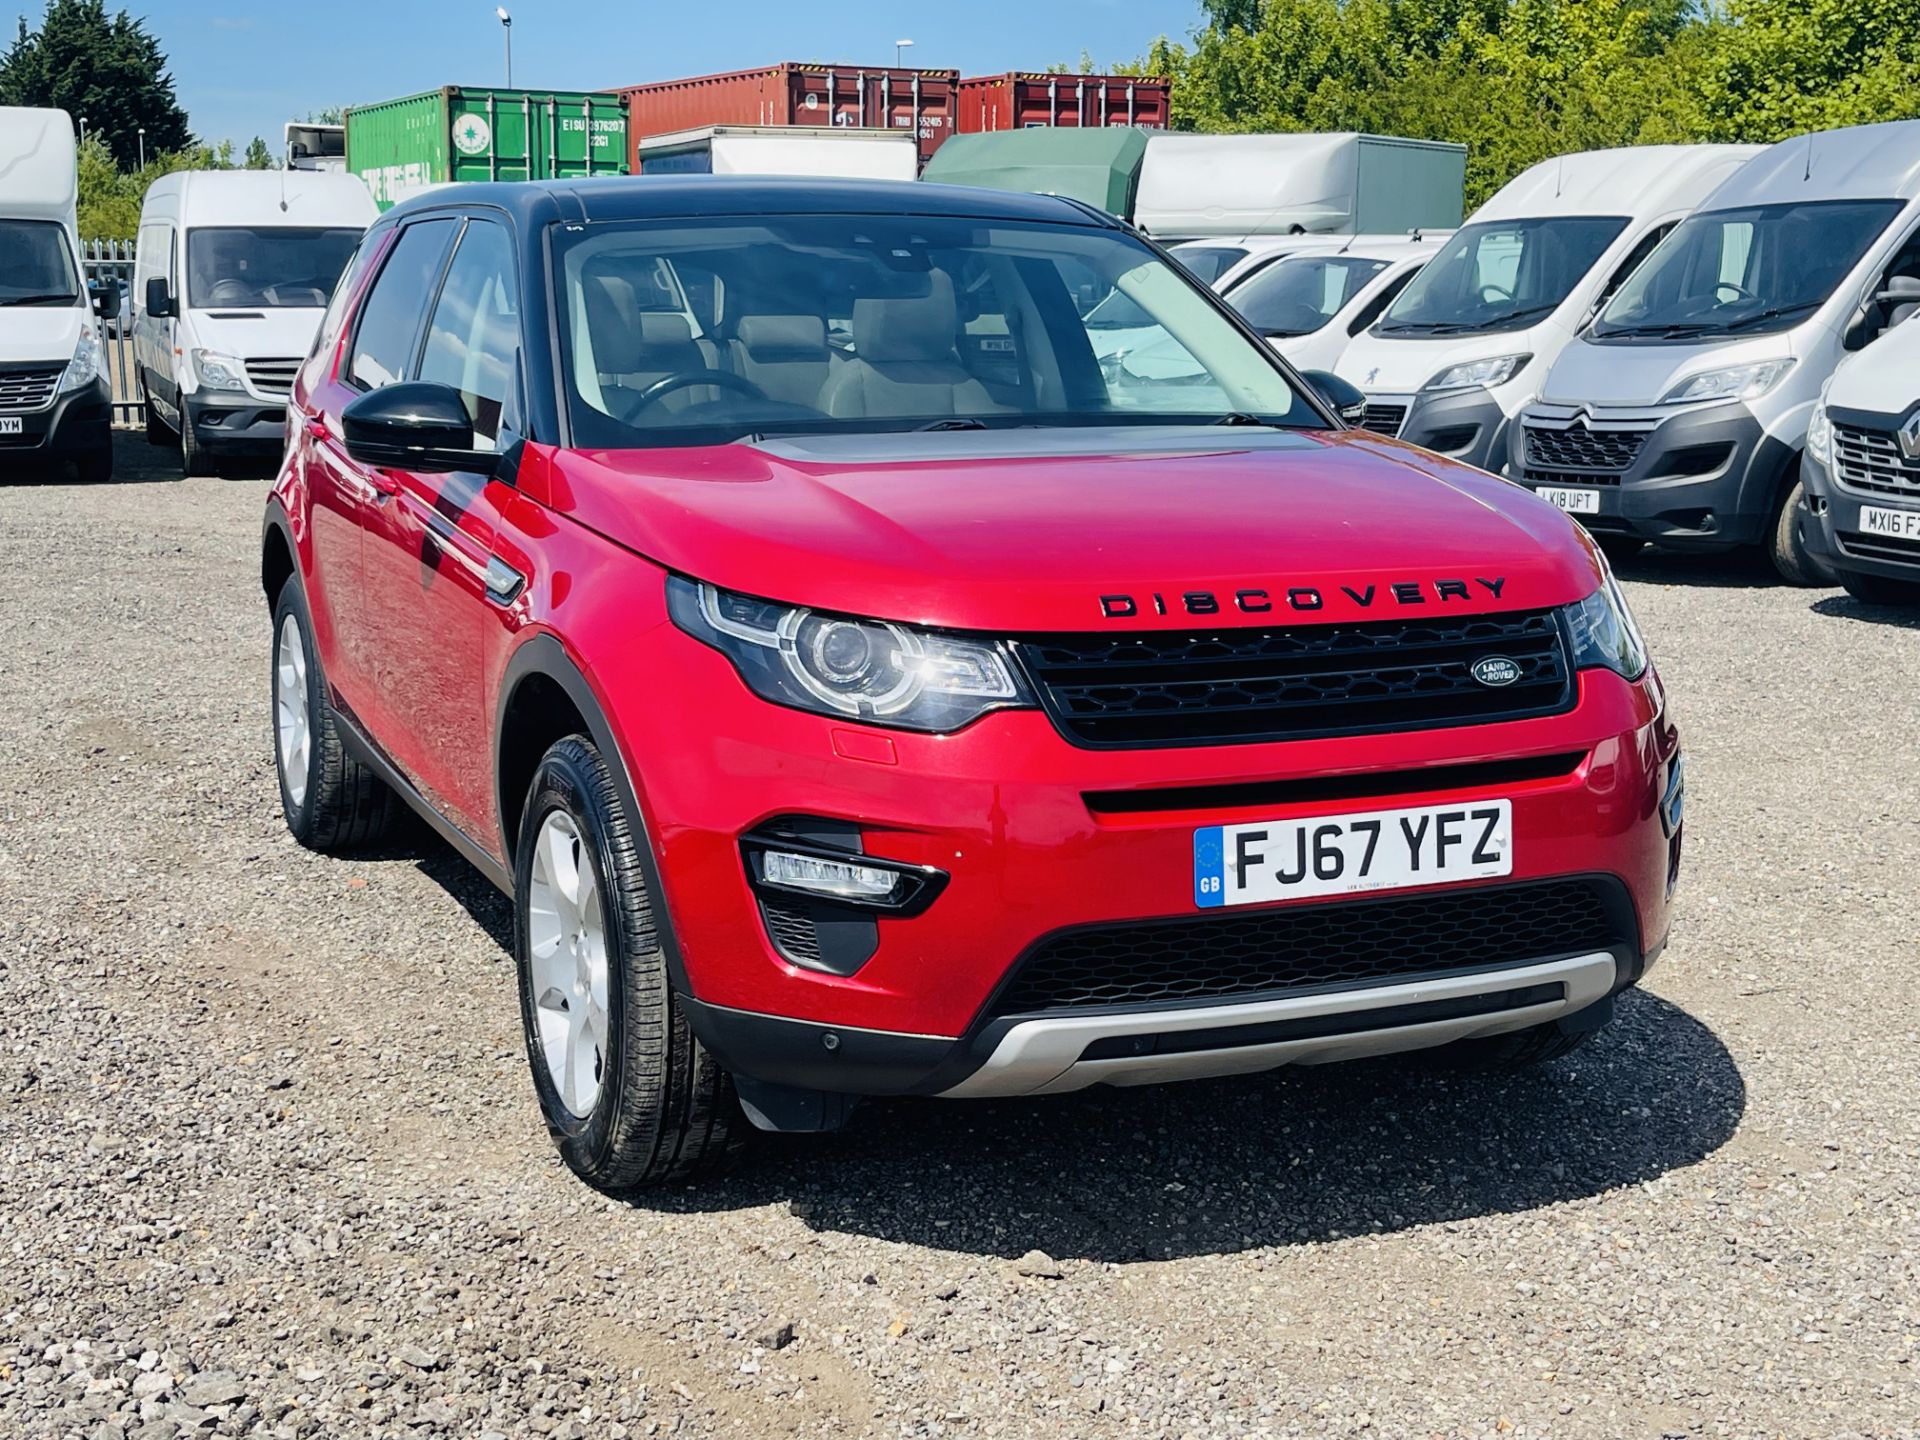 Land Rover Discovery Sport HSE 2.0 ED4 2017 '67 Reg' Sat Nav - Panoramic Glass Roof - ULEZ Compliant - Image 2 of 33